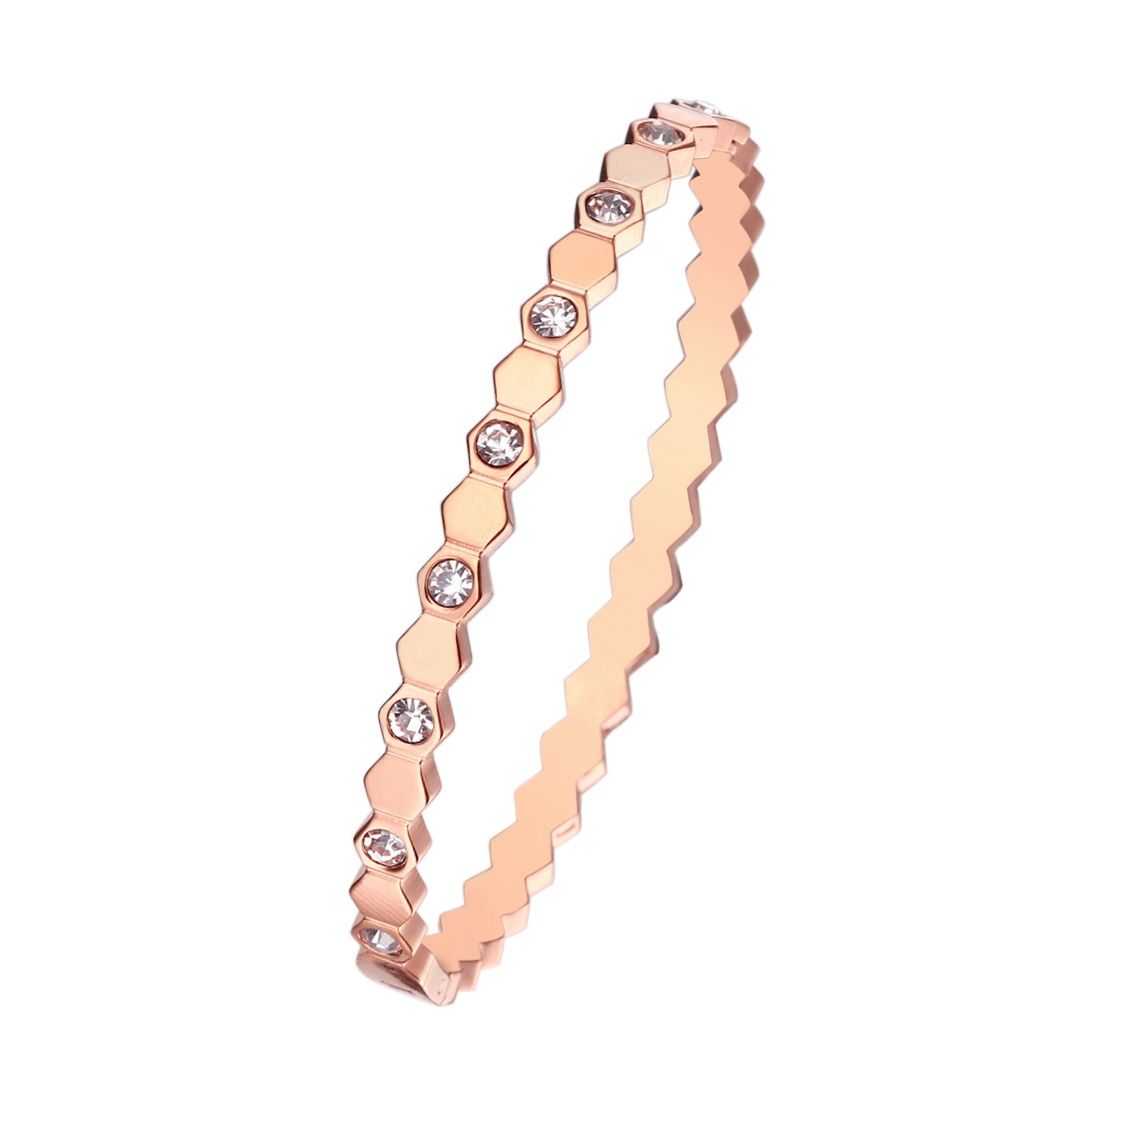 https://m.clubbella.co/product/larry-18-k-rose-gold-plated-bangle/ Larry (1)